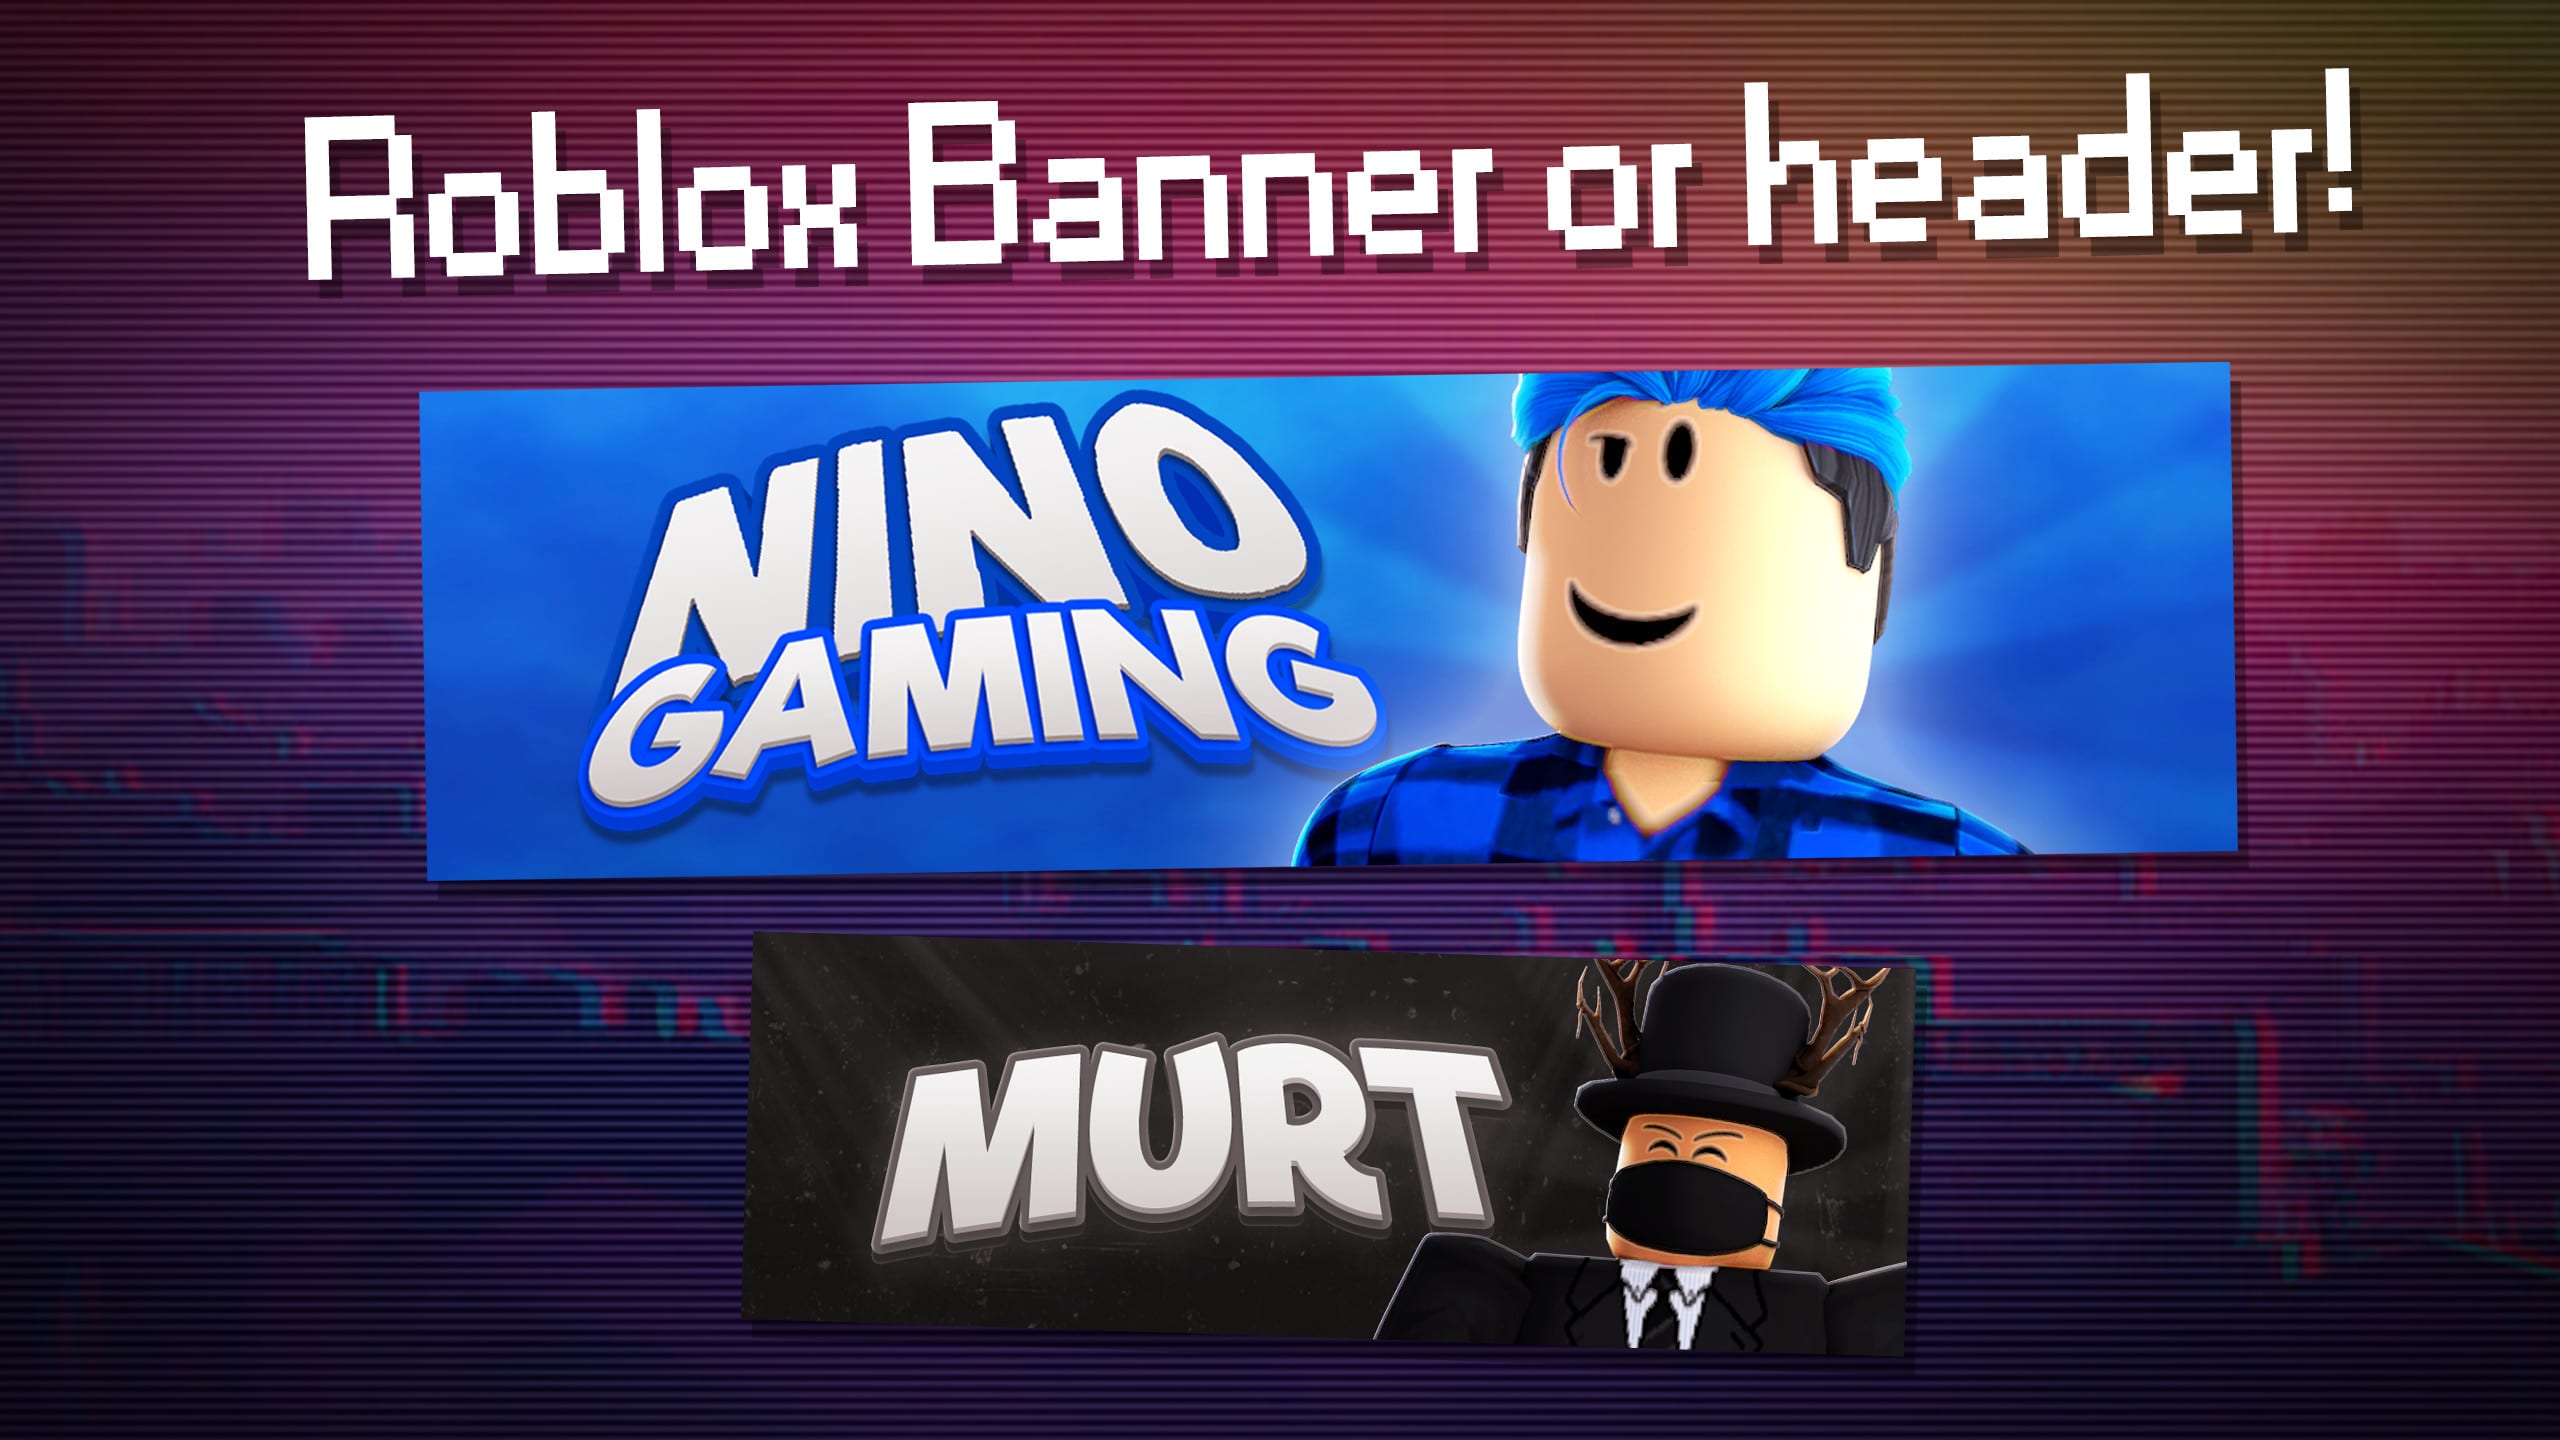 Design A Professional Roblox Banner Or Header By Frxday Fiverr - cool 728x90 banner roblox